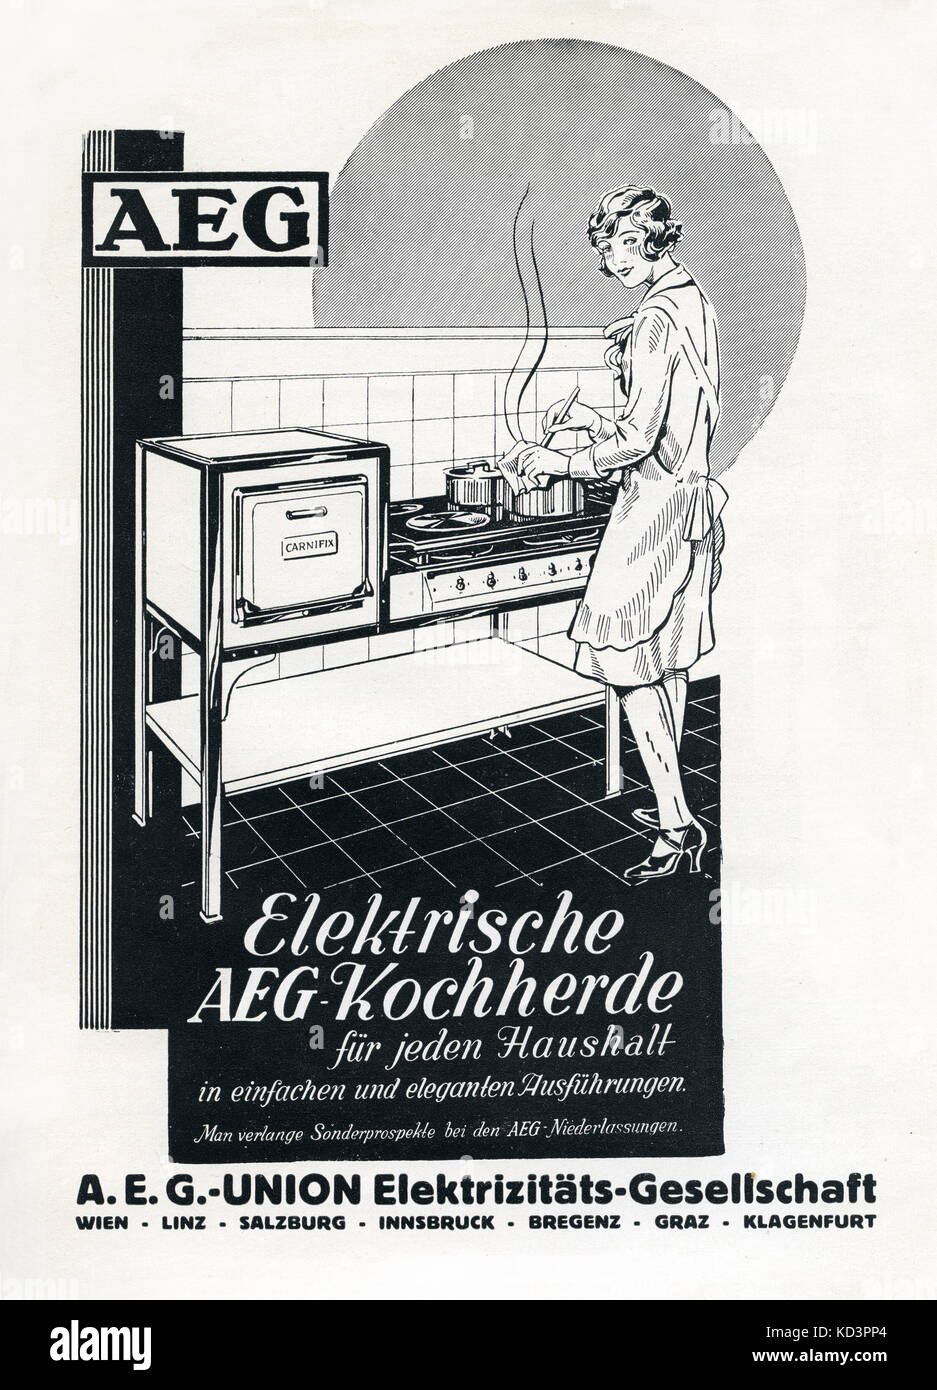 AEG Advertisement from 1933 (Ausrian theatre publication). Advert for Elektrische AEG -Kochherde fur jeden Haushalt.   / AEG - cooking stove for every household. Stock Photo